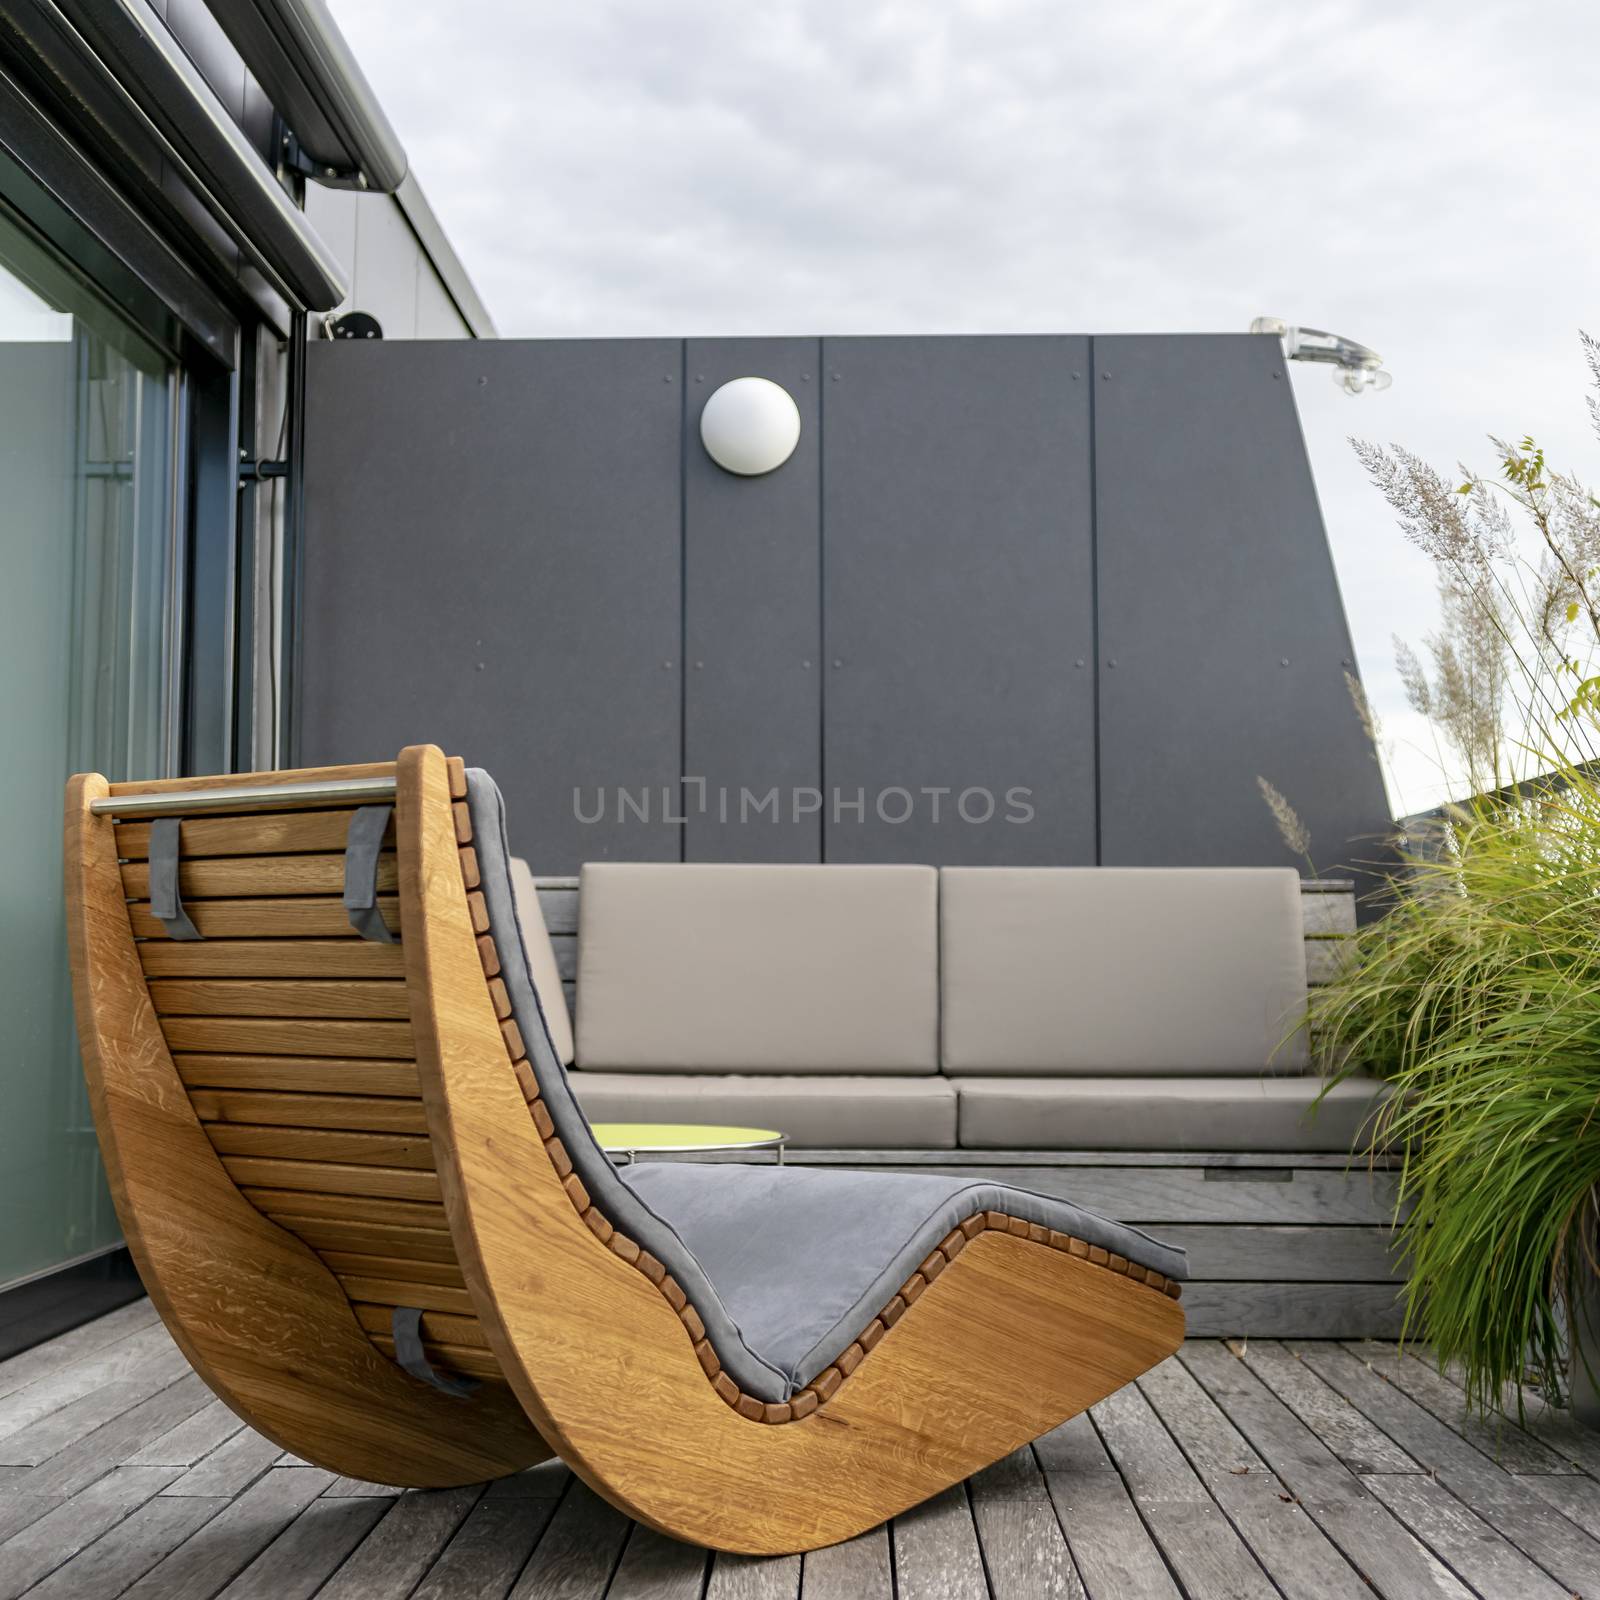 Rocking lounger on a roof terrace with bamboo and grasses